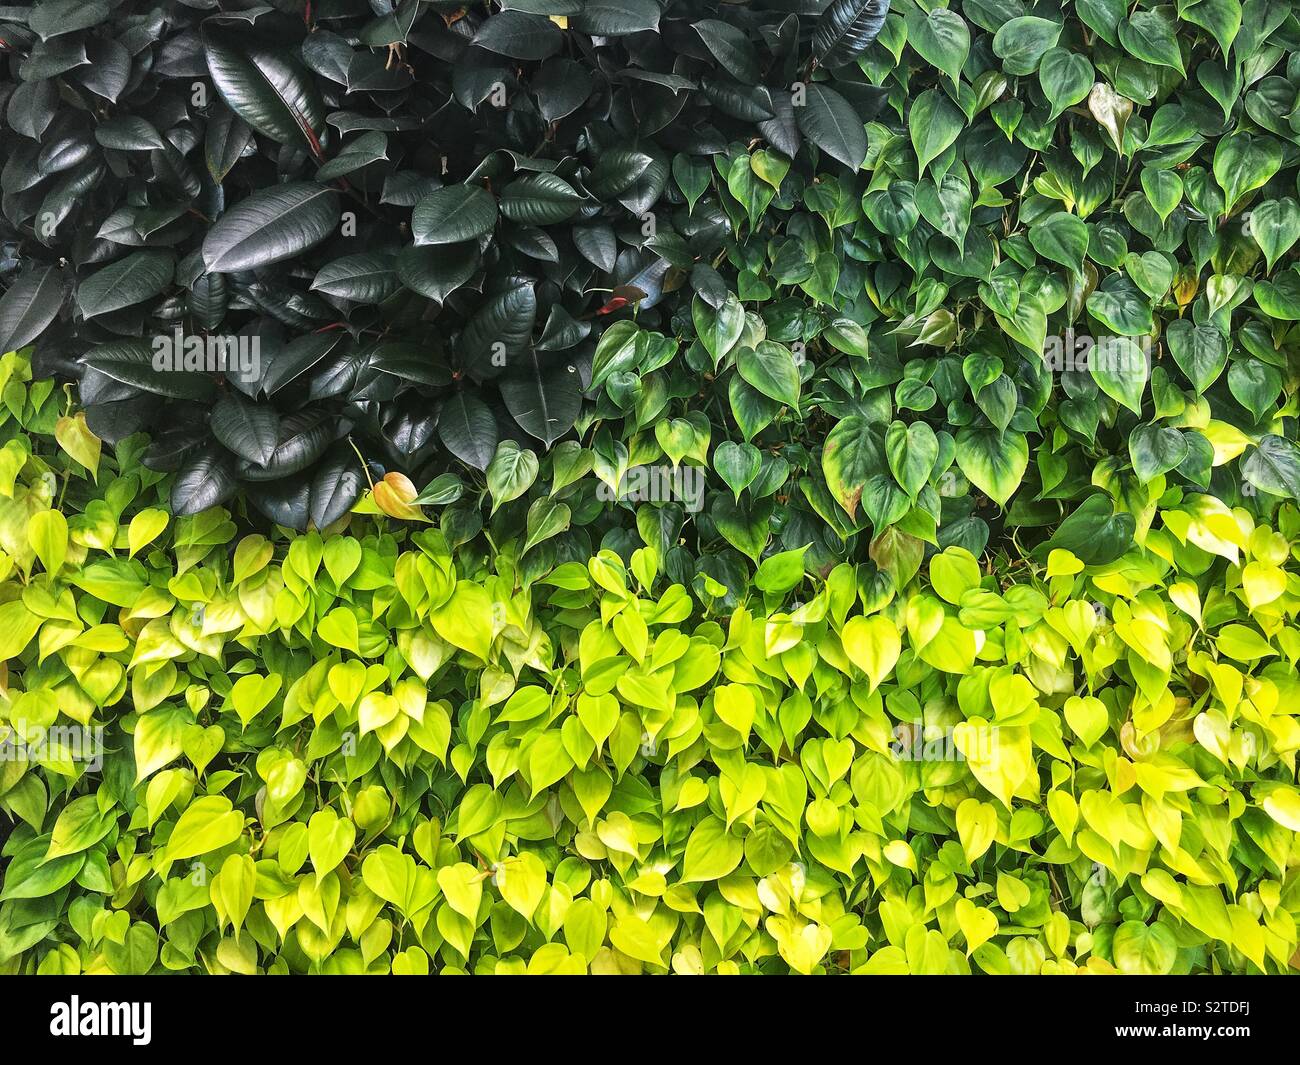 Living urban garden wall full of a variety of green leafy plants. Stock Photo